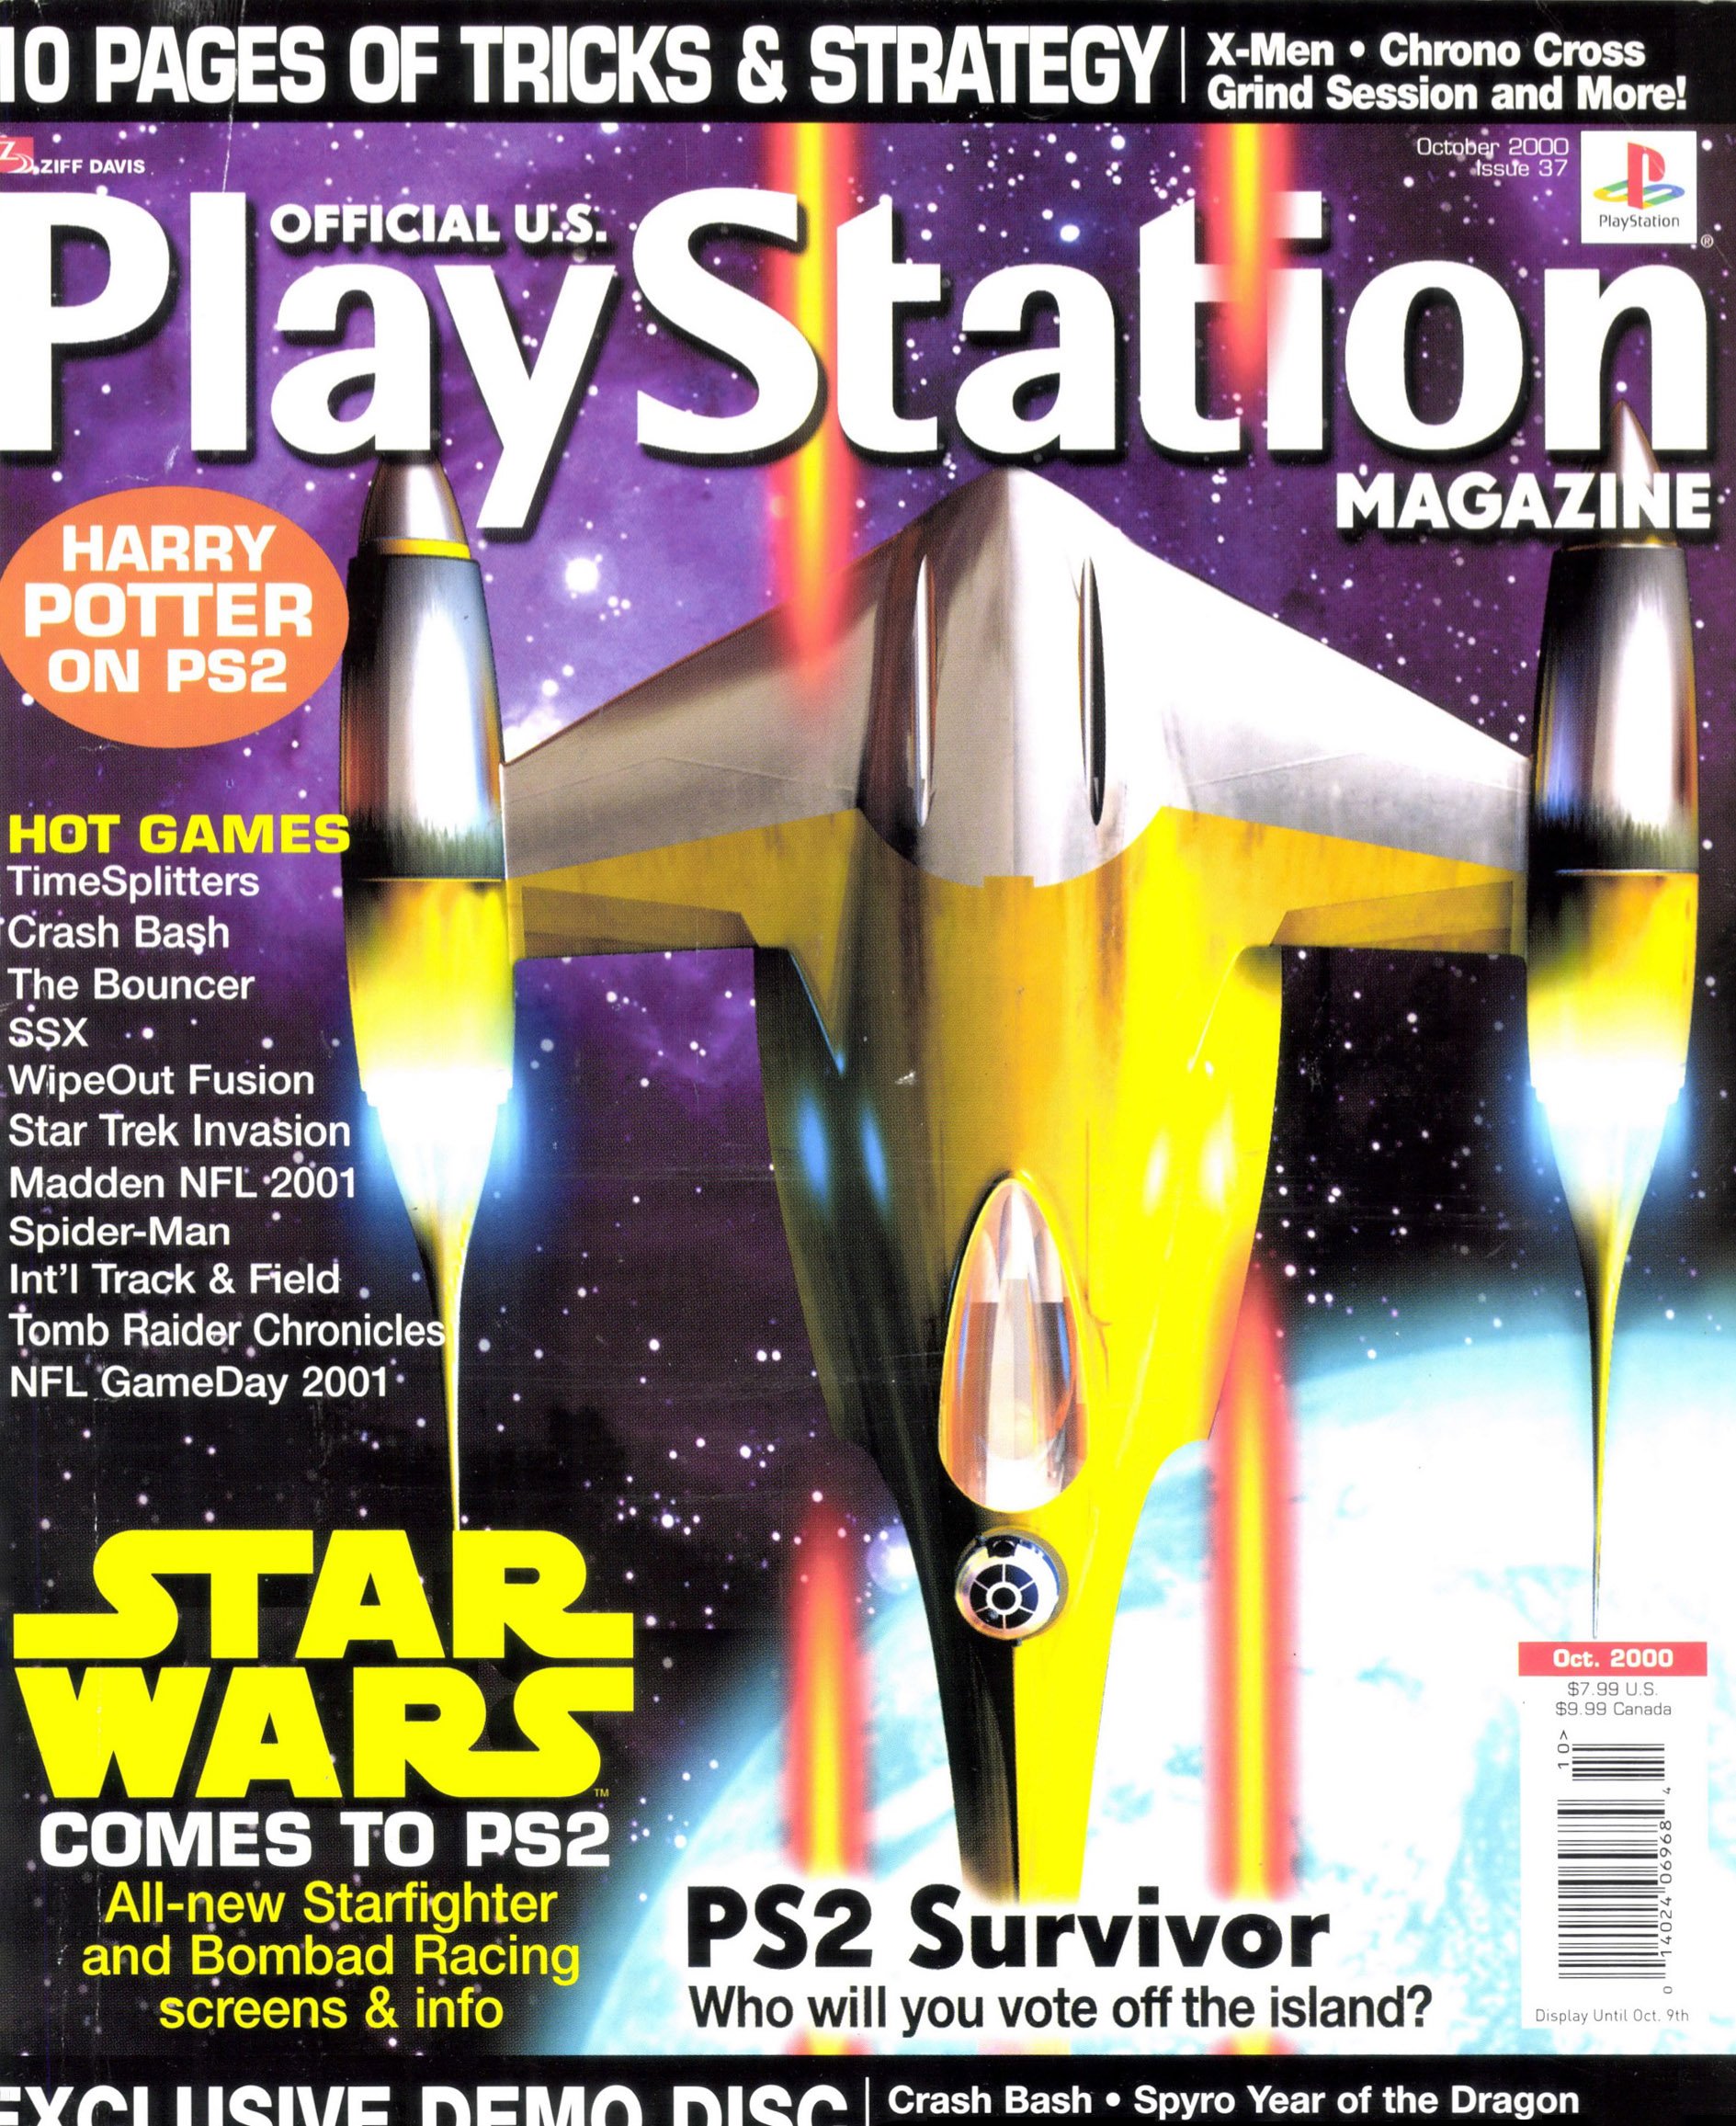 Official U.S. Playstation Magazine Issue 037 (October 2000)